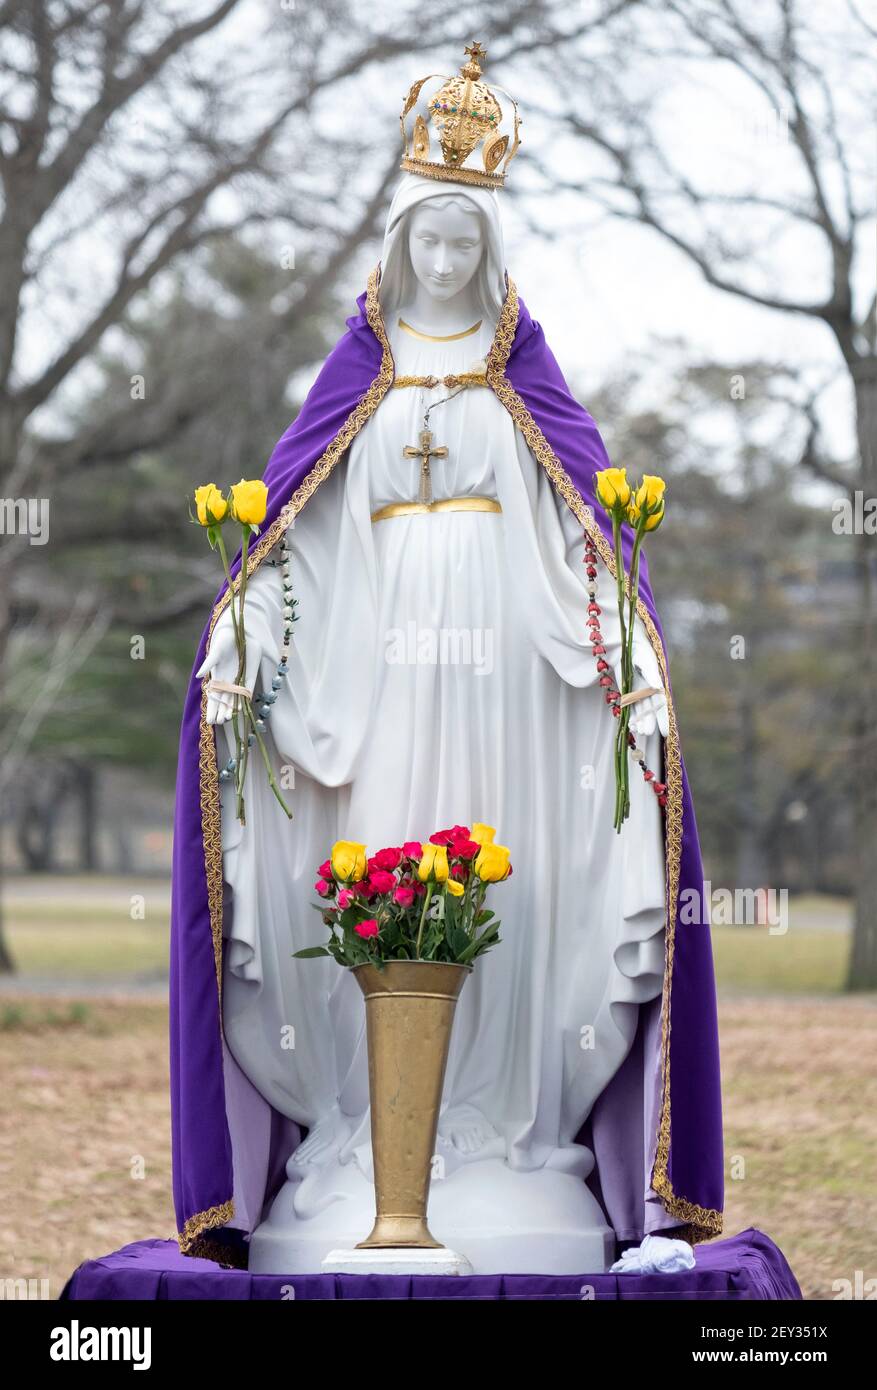 A statue of the Virgin Mary with a pupple cape signifying lent. At an outdoor prayer service in Flushing Meadows Corona Park in Queens, New York City. Stock Photo